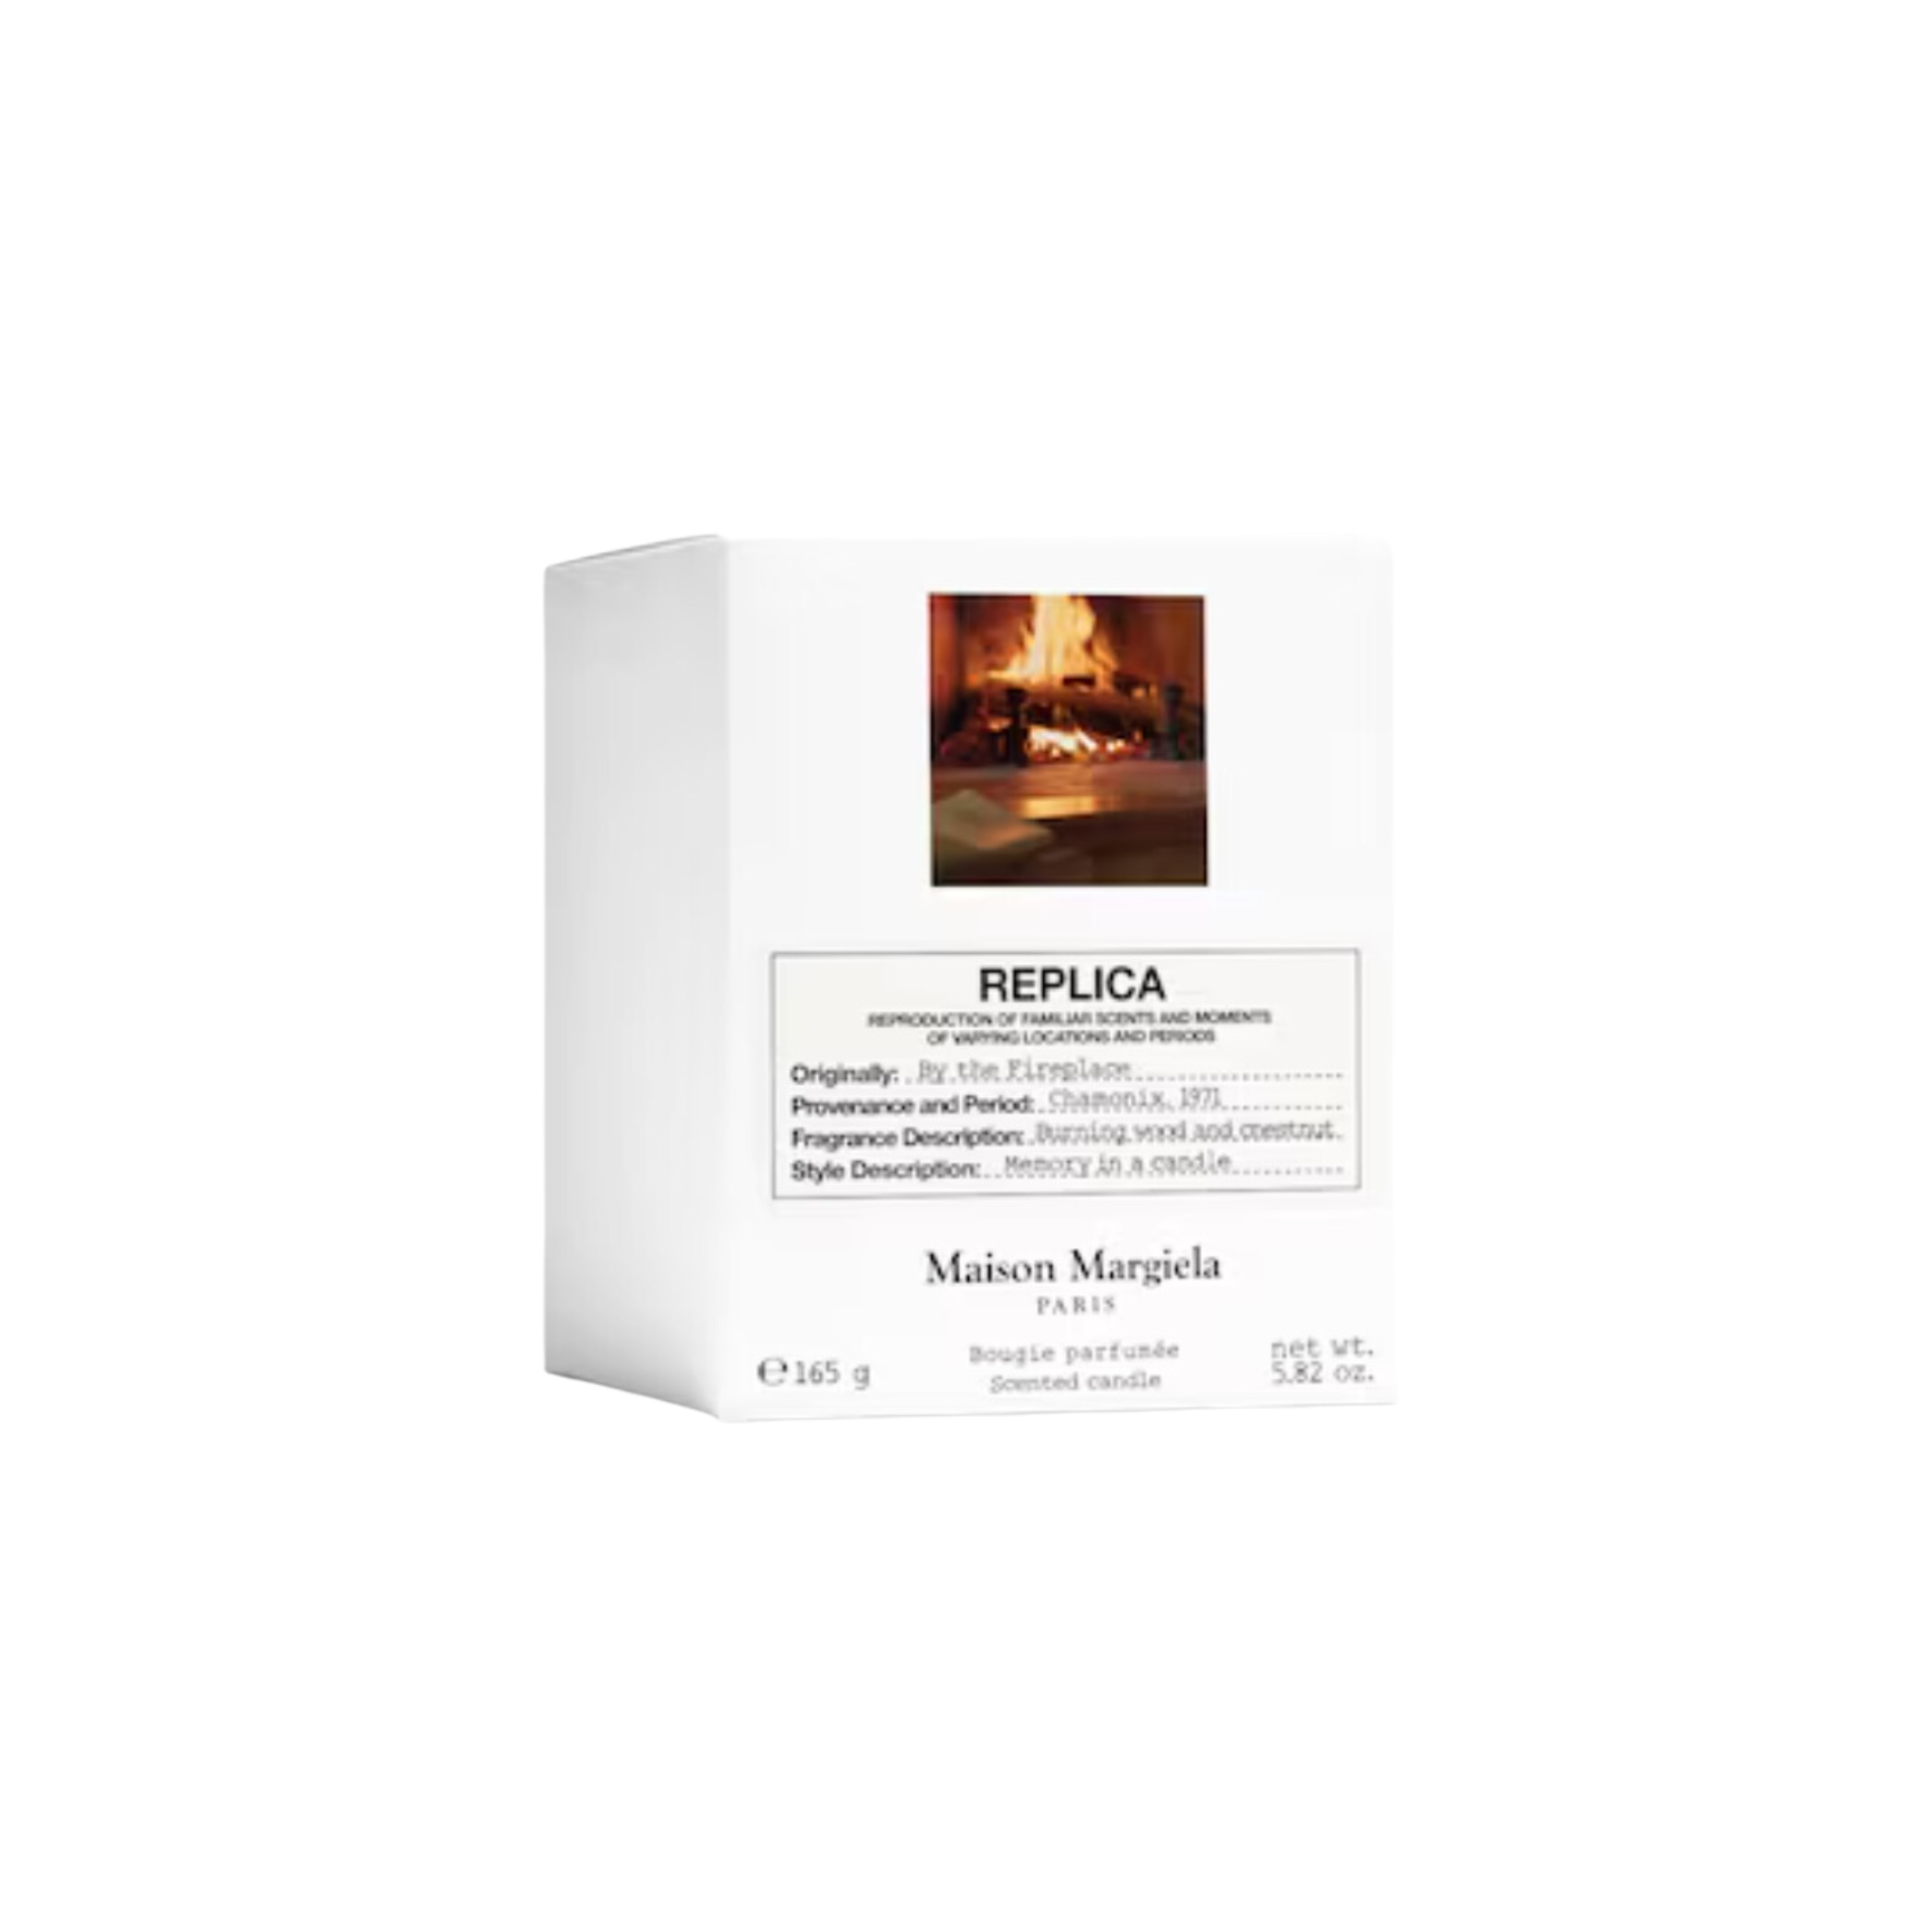 Maison Margiela Replica Candle By The Fireplace